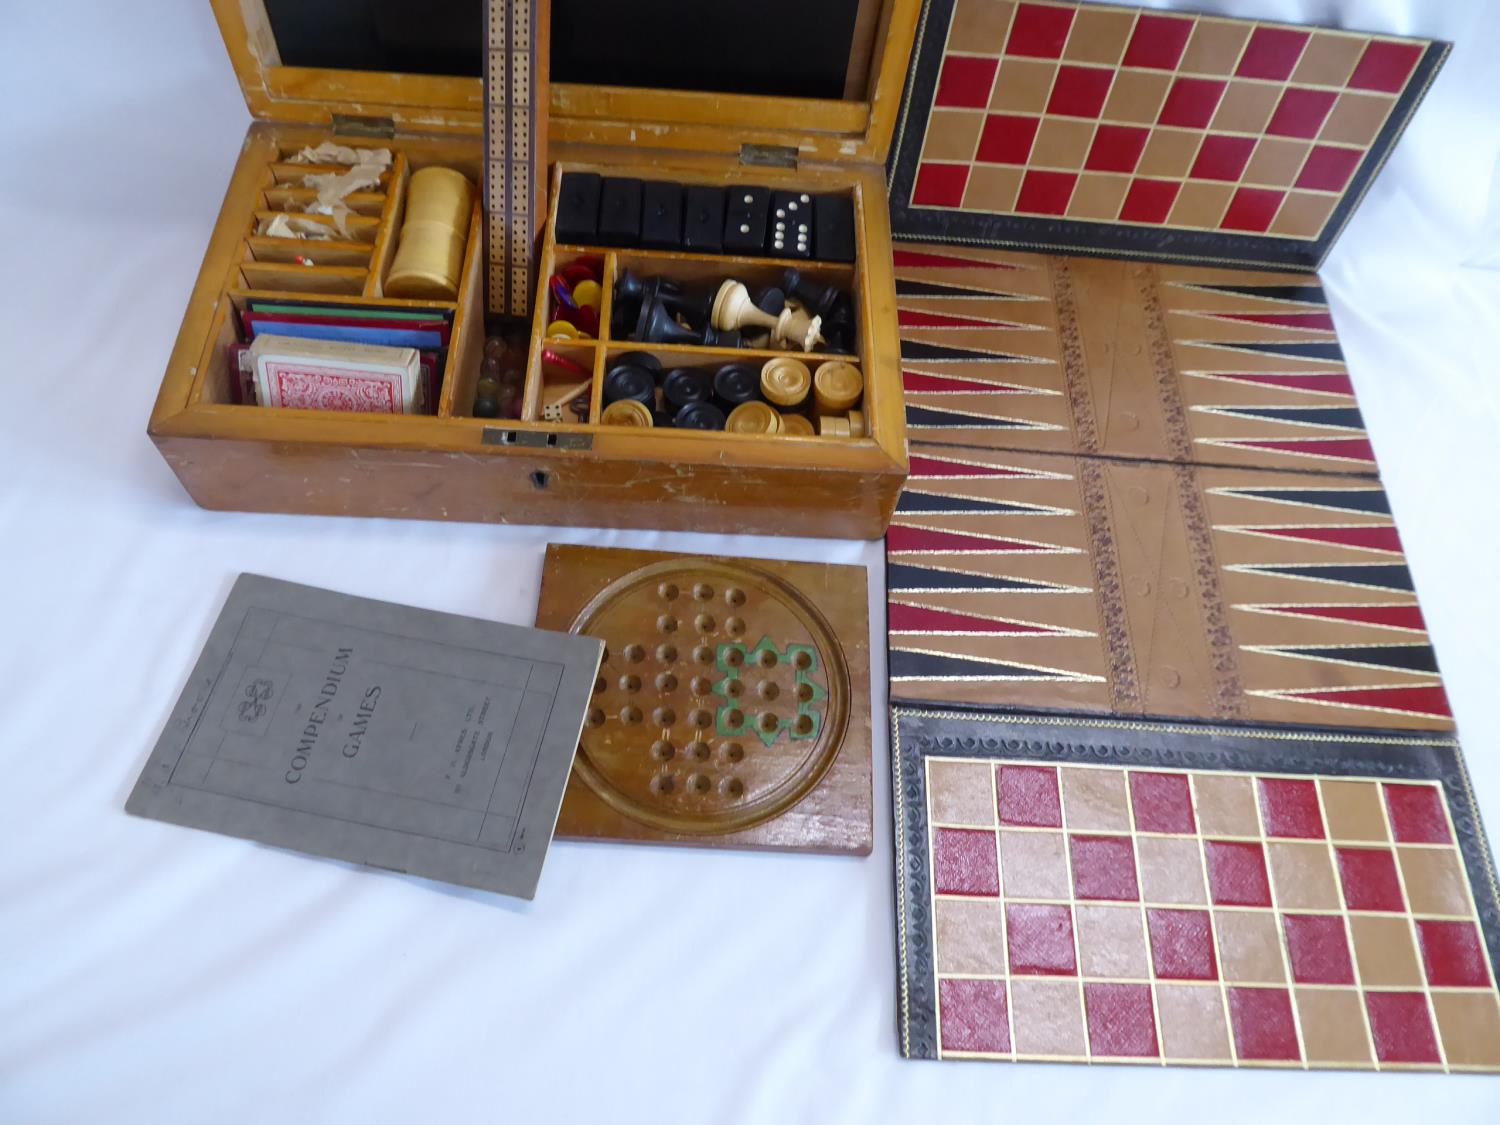 Early 20thC F H Ayres Ltd compendium of games in fitted wooden case - to include the steeplechase, - Image 4 of 6